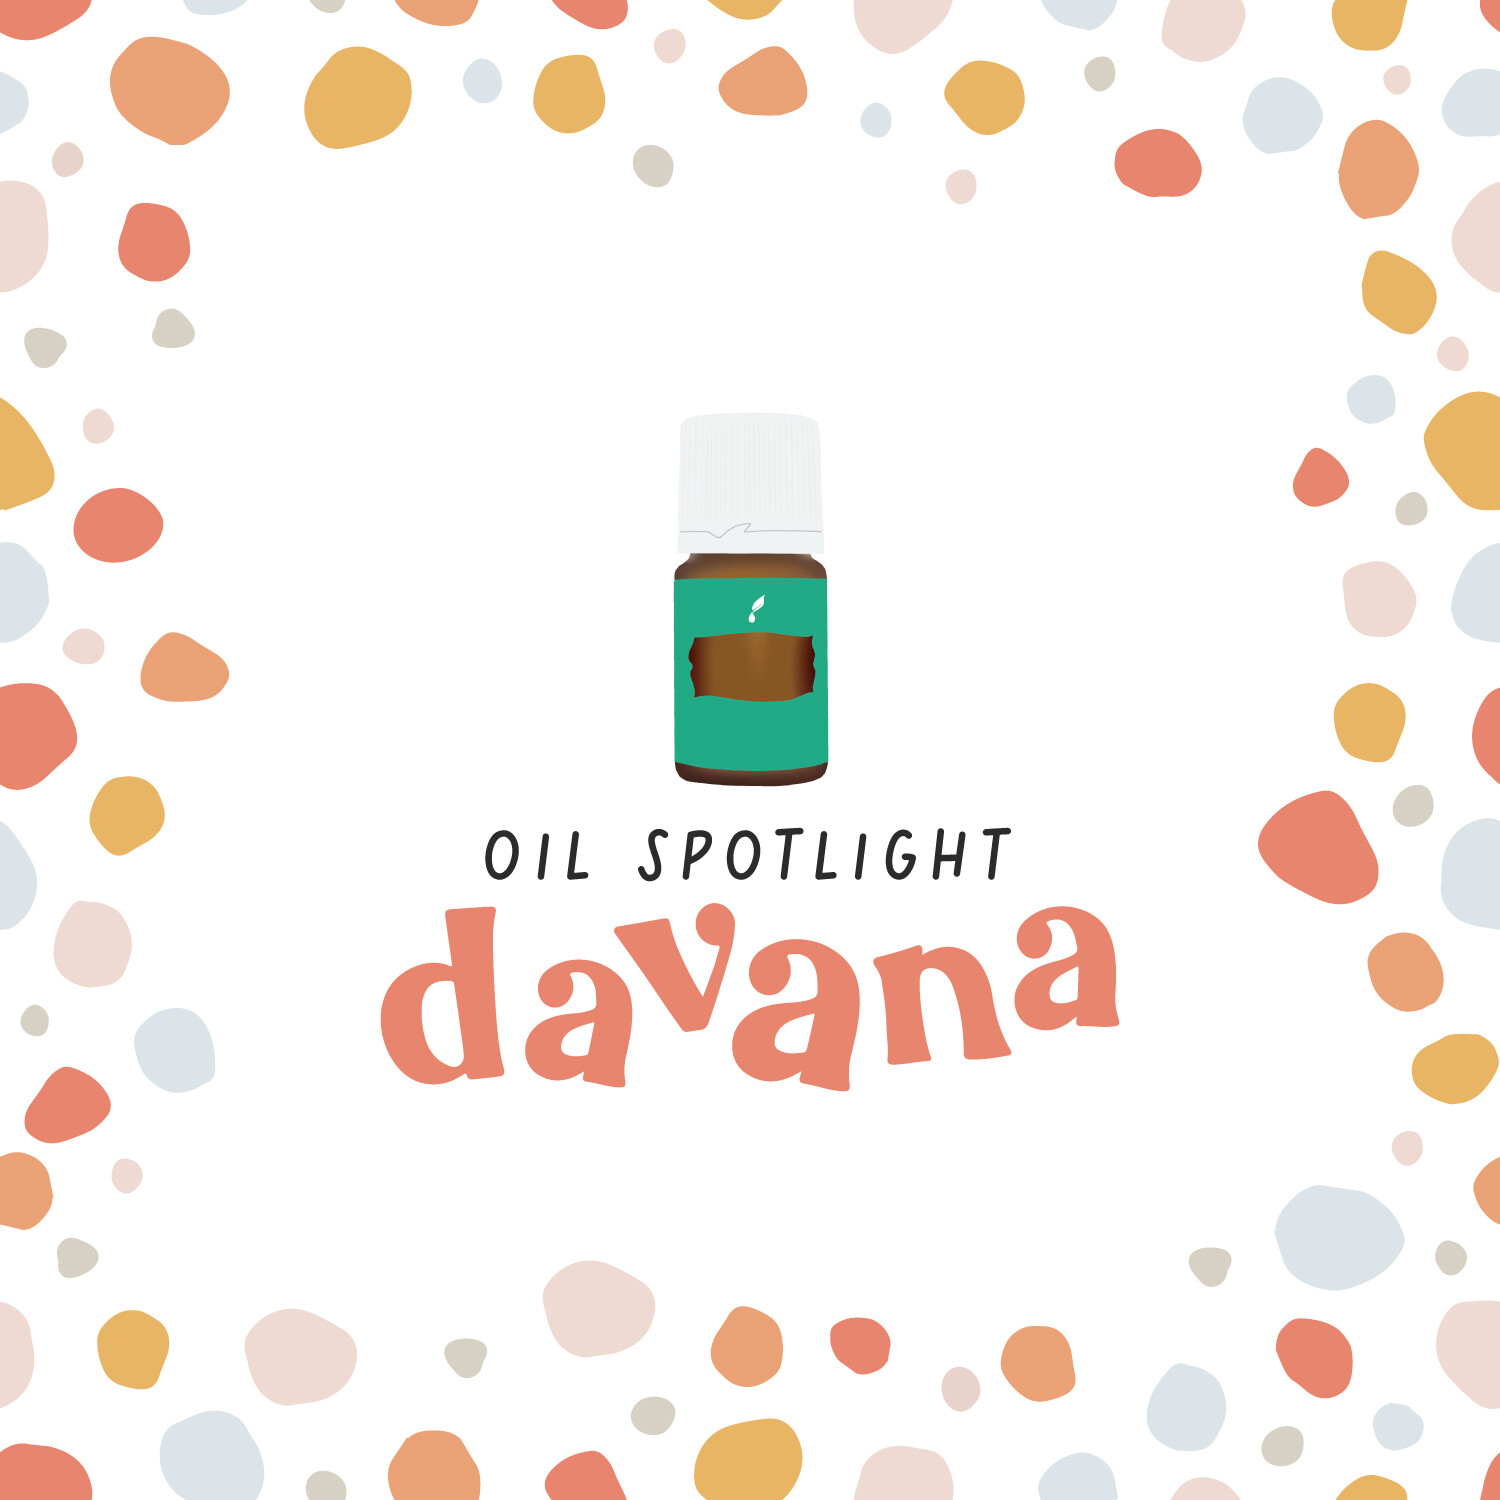 What is it about Davana?